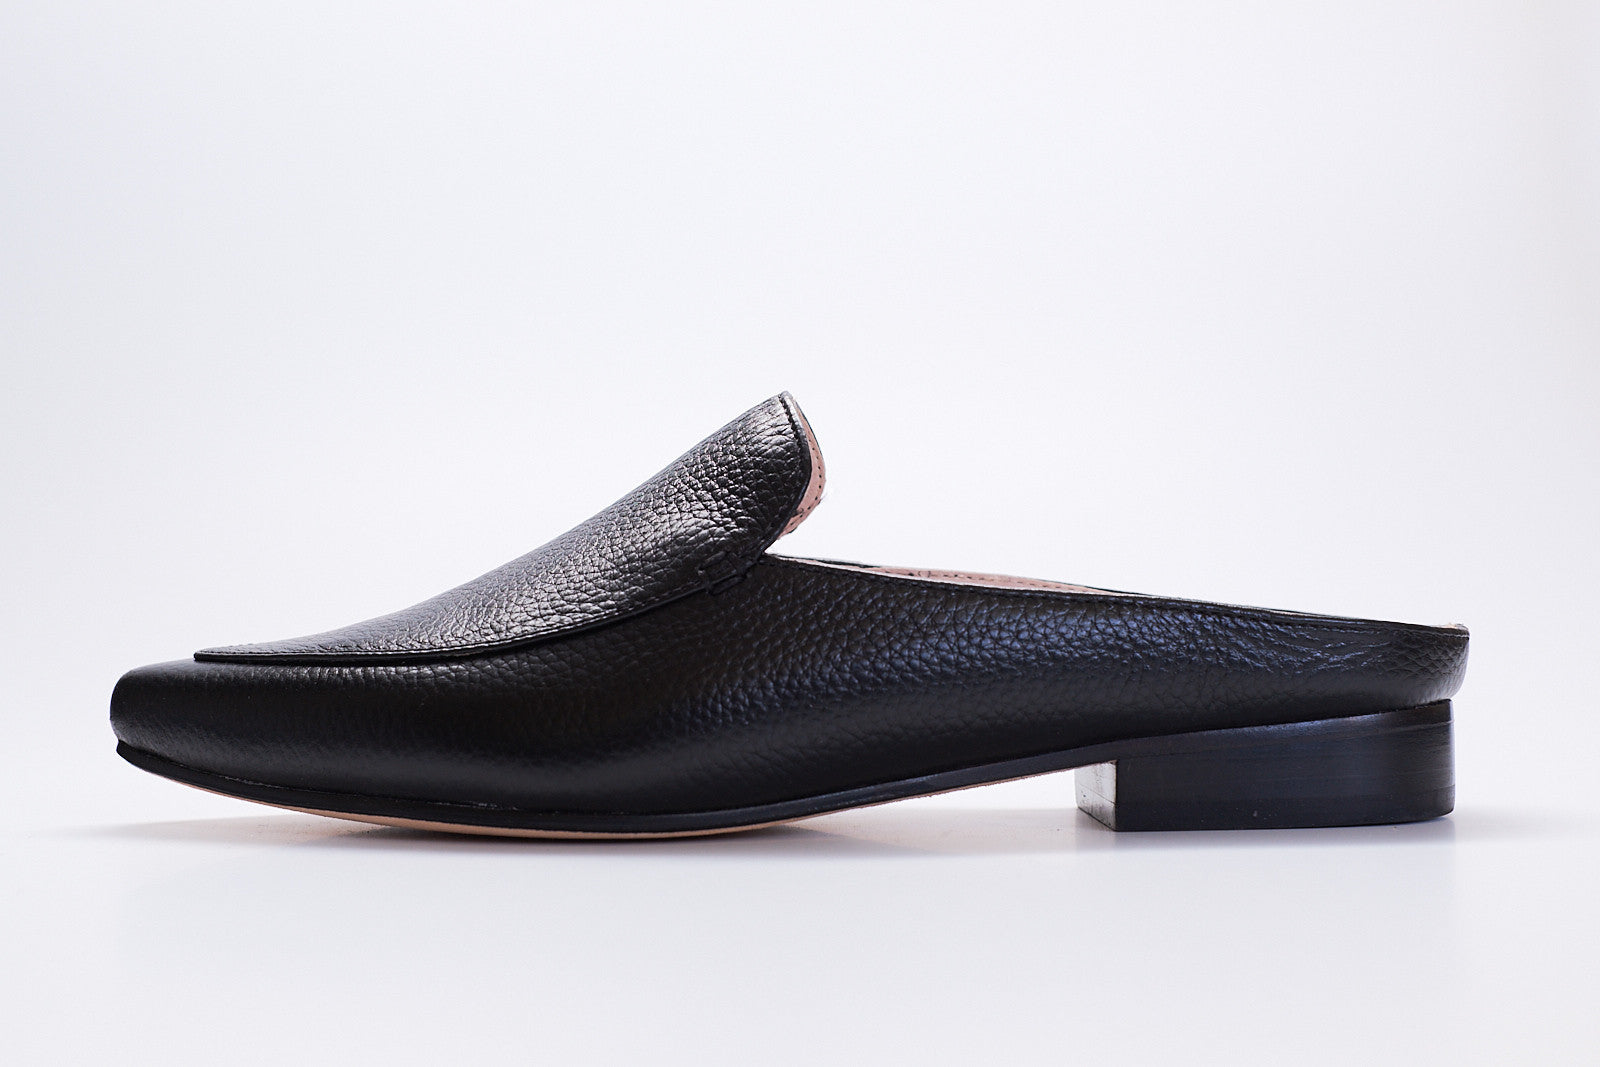 pointed toe tumbled leather slip on mules for women. all black with black heel. italian made boutique footwear.